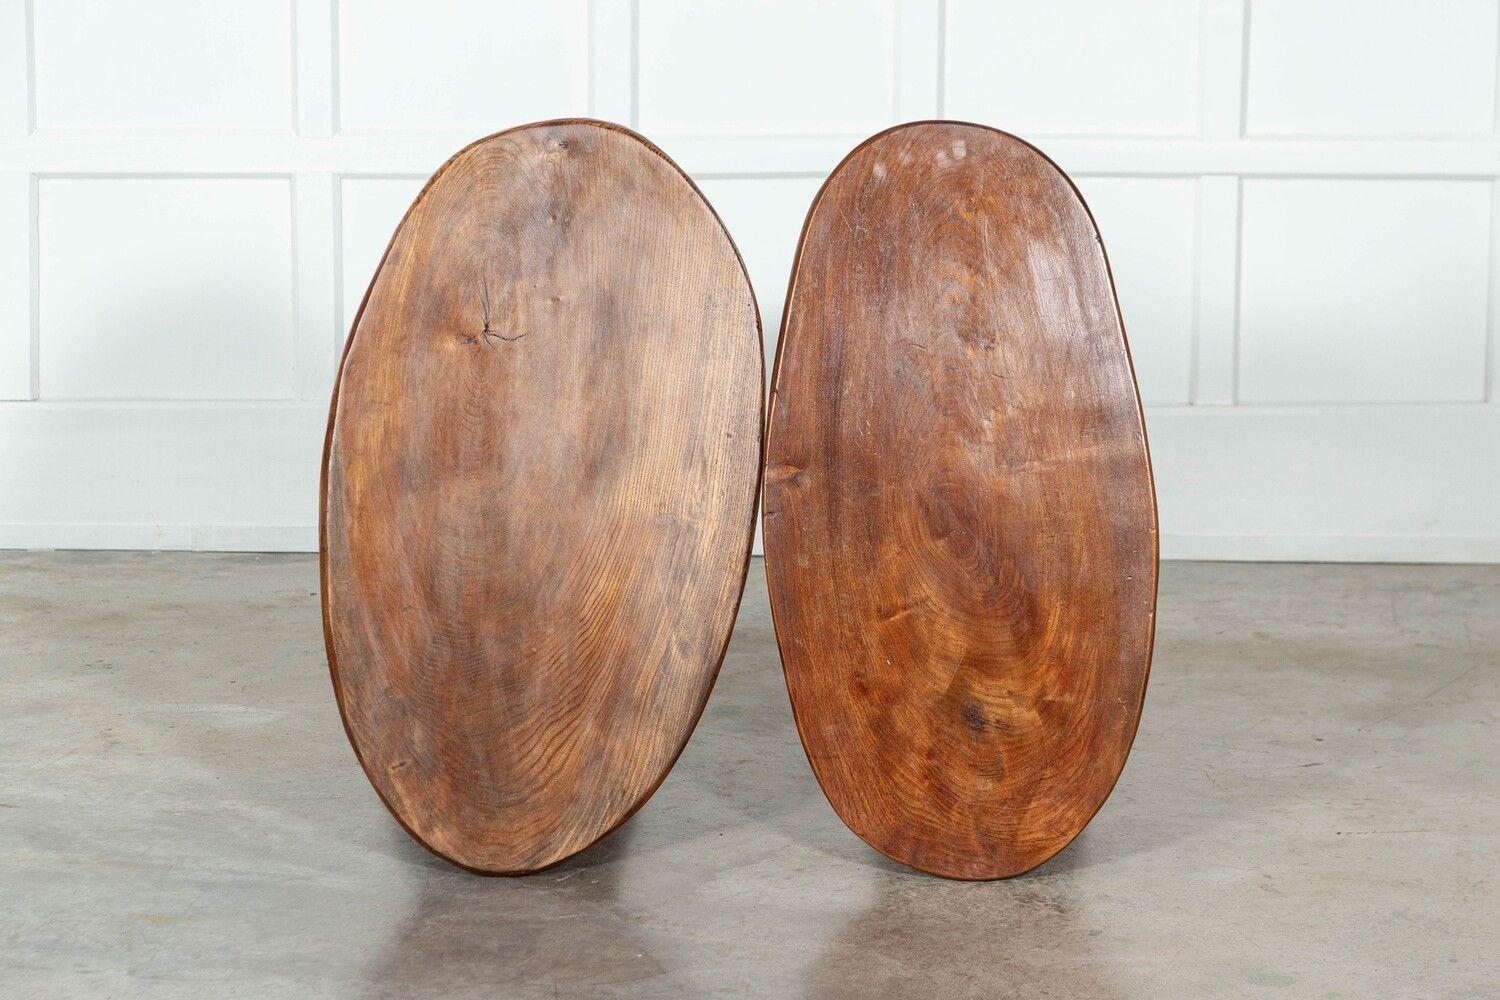 Mid 20thC
Pair MidC Oak Side / Coffee Tables
sku 1630
Price for the pair
W80 x D47 x H58 cm